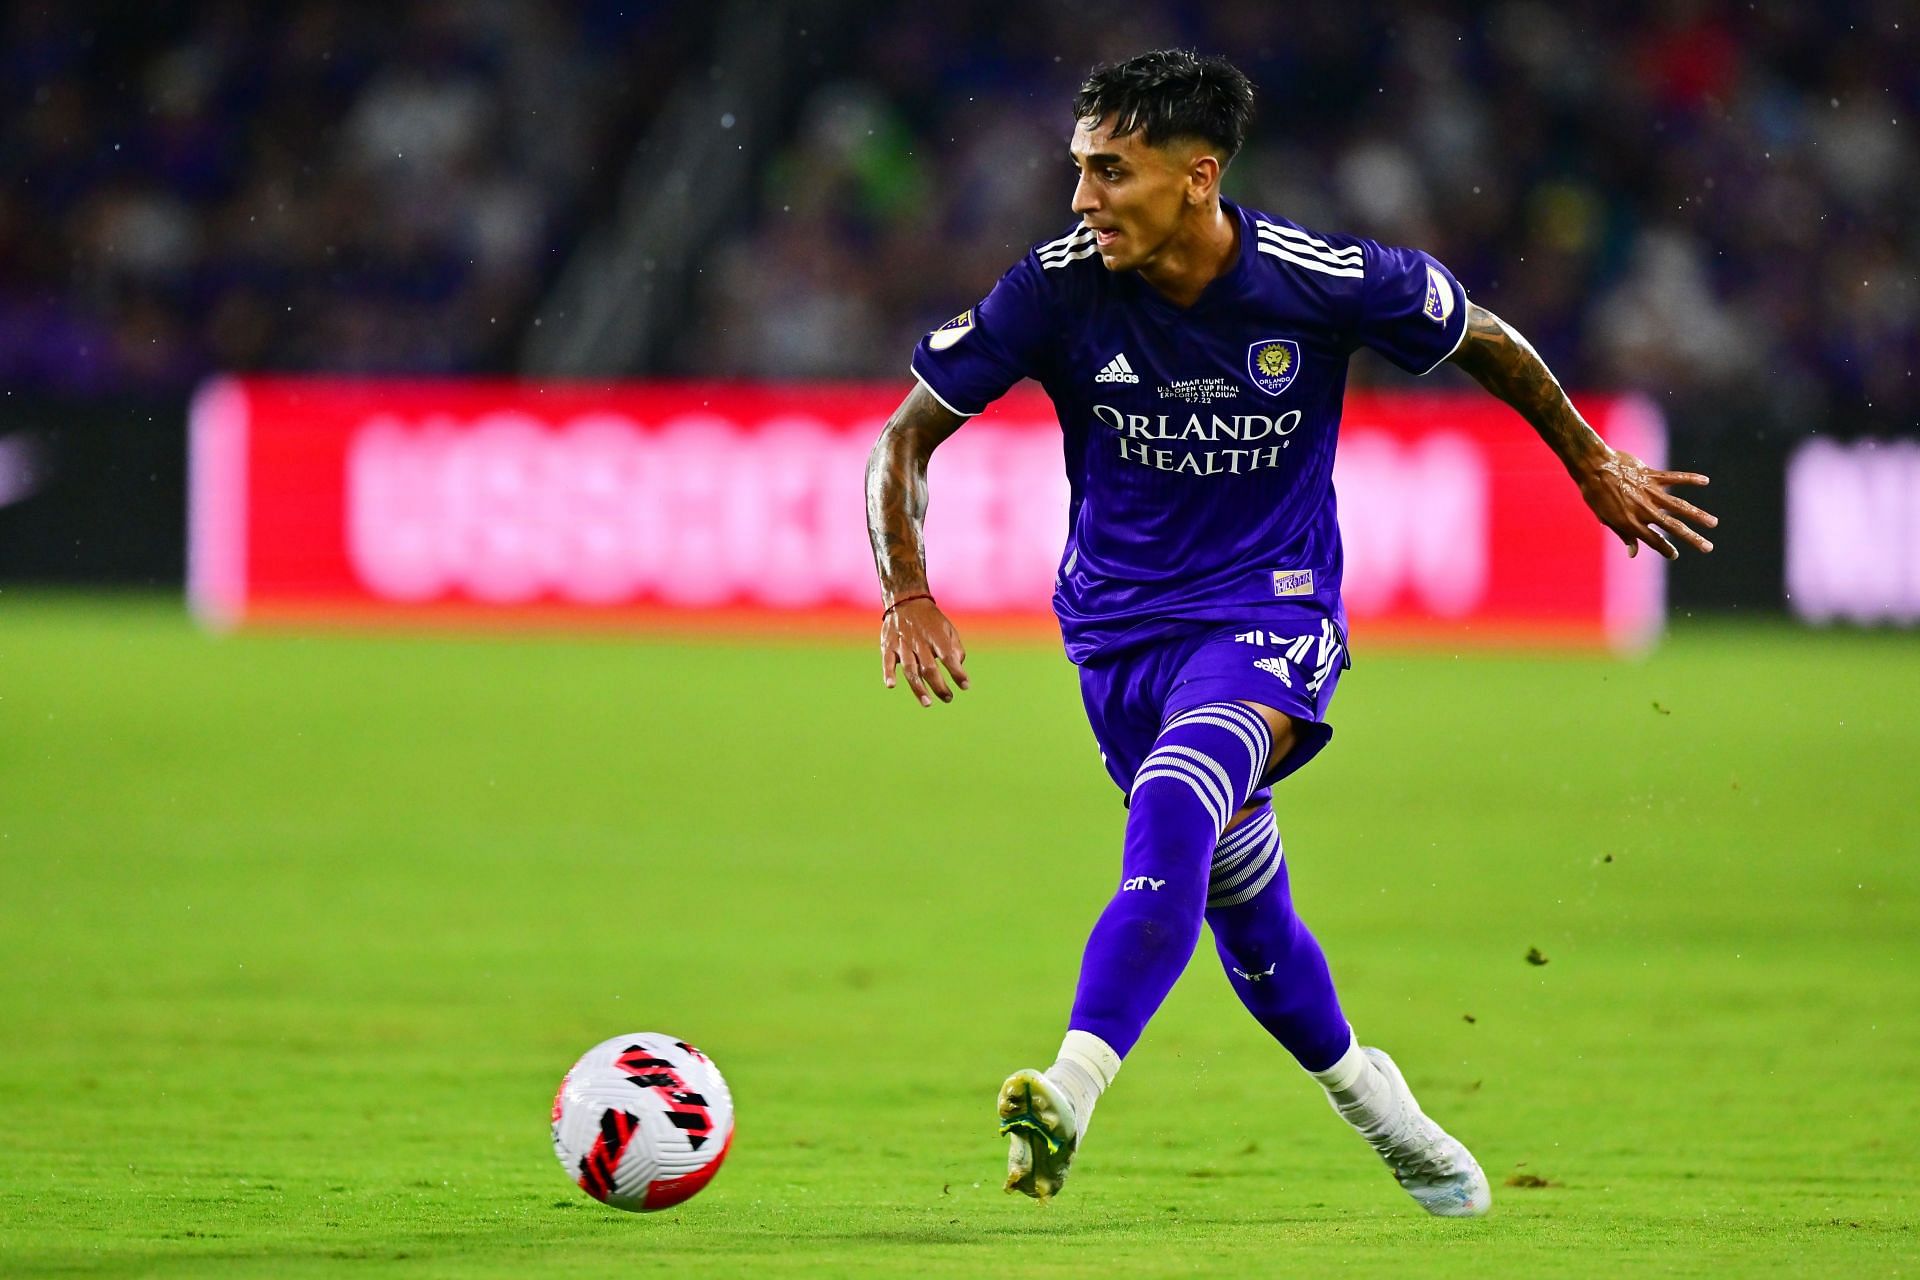 Orlando City have a point to prove